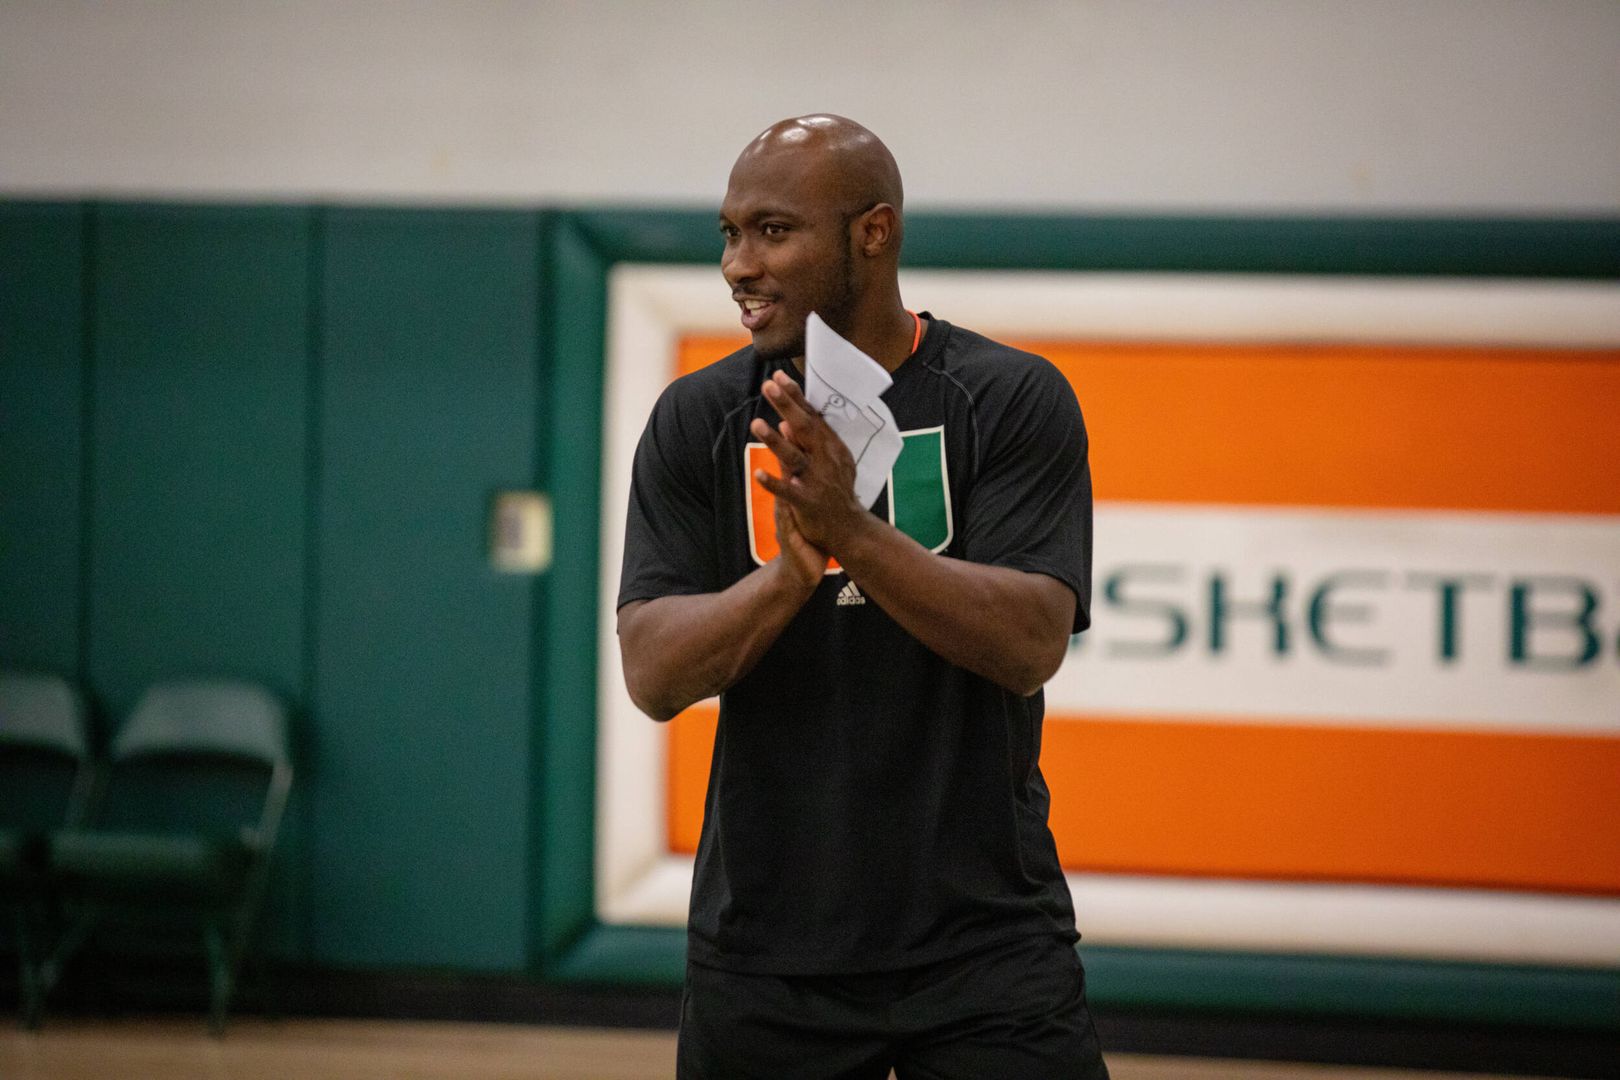 WBB's Anthony Recognized as One of Most Impactful Assistant Coaches